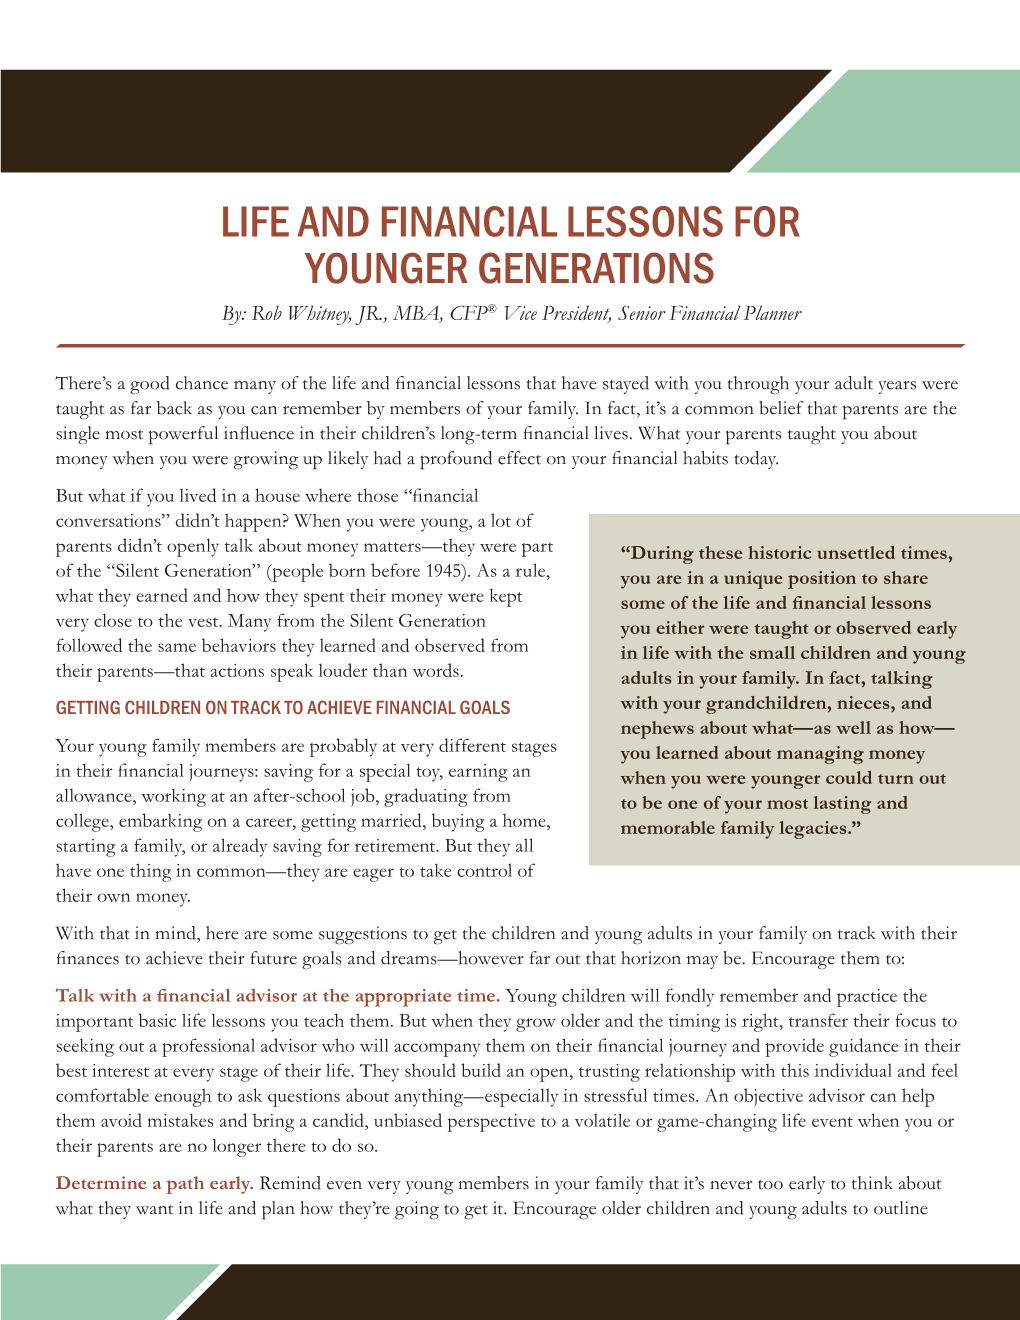 LIFE and FINANCIAL LESSONS for YOUNGER GENERATIONS By: Rob Whitney, JR., MBA, CFP® Vice President, Senior Financial Planner